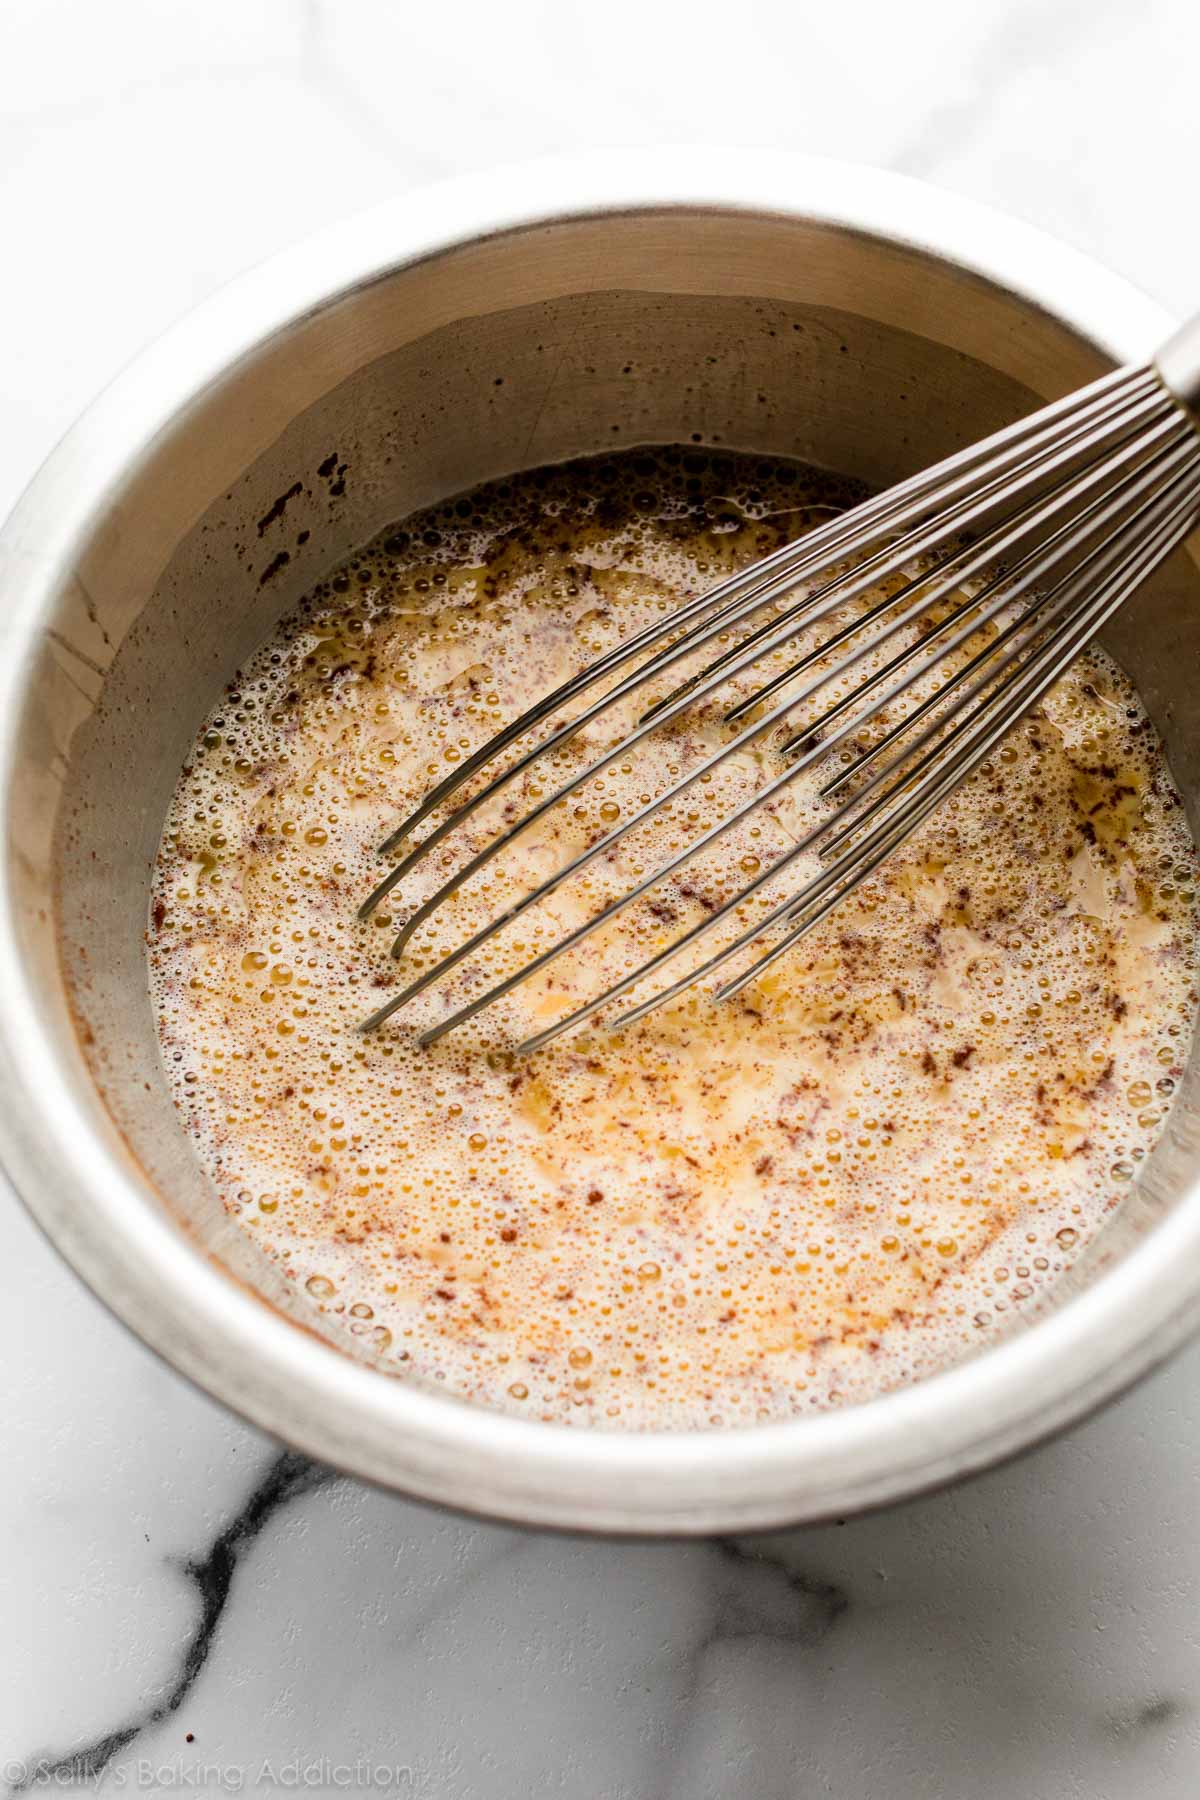 Mix brown sugar, cinnamon and egg custard in a bowl with a whisk